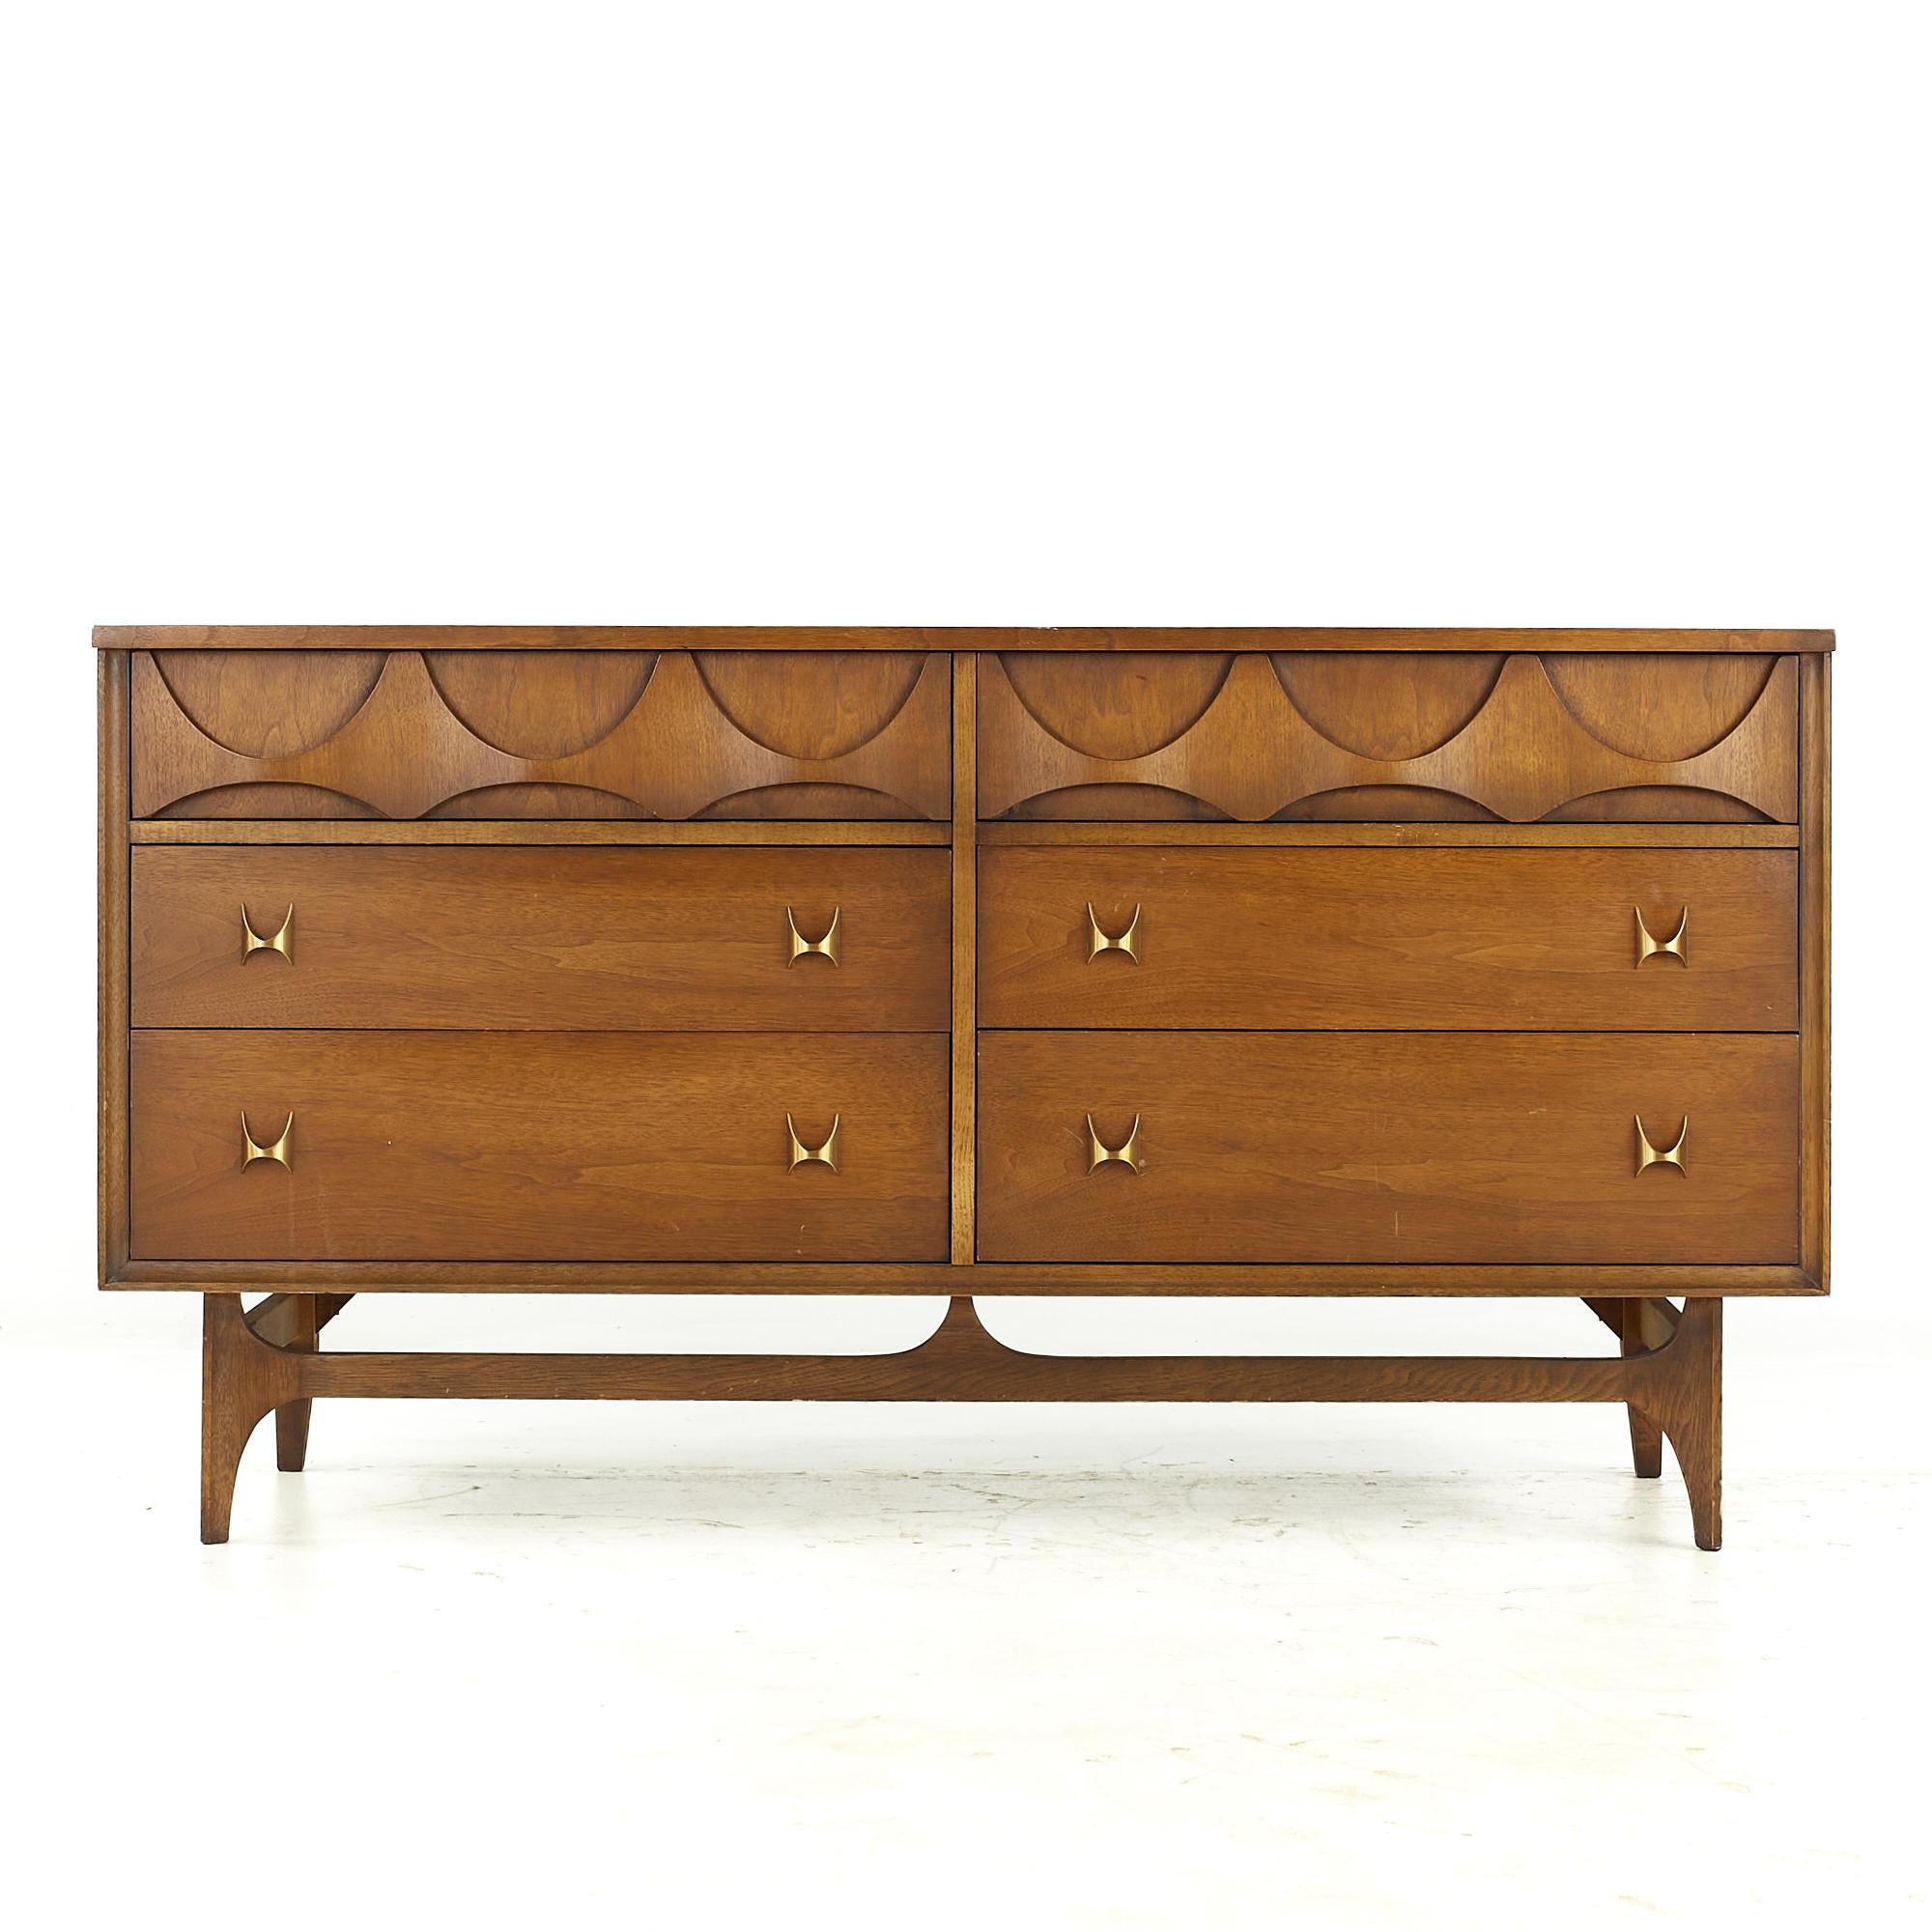 Broyhill Brasilia midcentury Walnut and Brass 6 Drawer Dresser.

This lowboy measures: 58 wide x 19 deep x 31 inches high

All pieces of furniture can be had in what we call restored vintage condition. That means the piece is restored upon